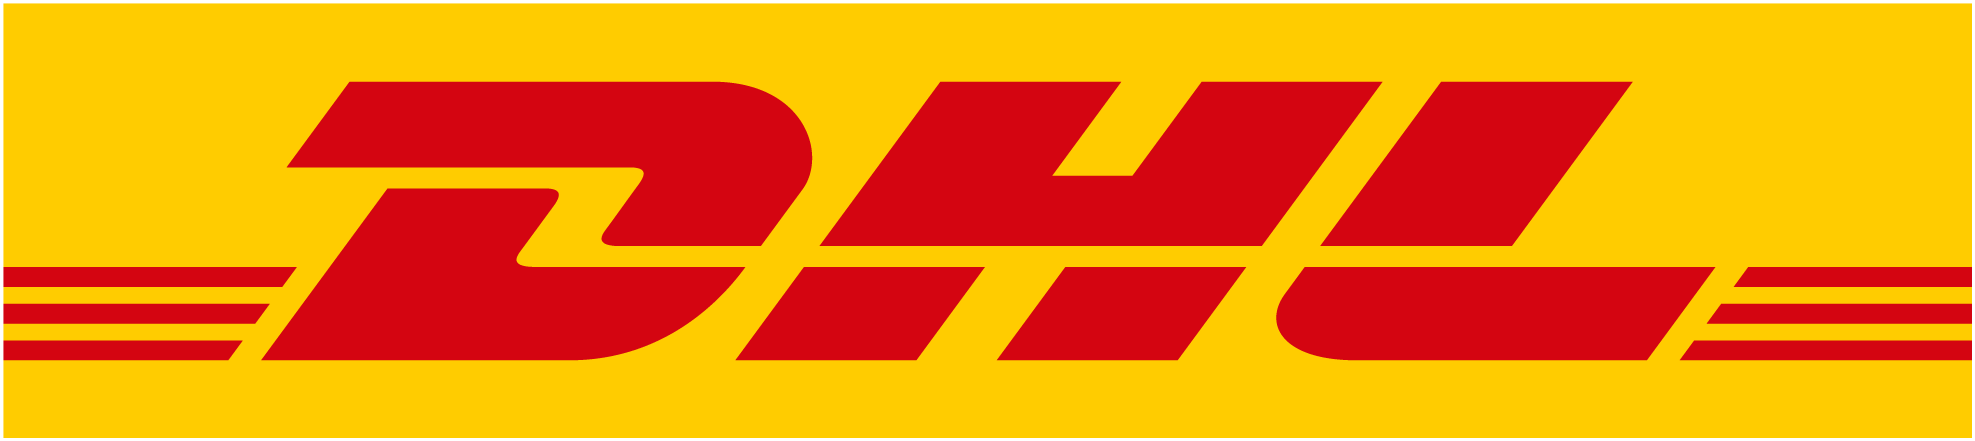 How DHL Aims to Remake Logistics with AI